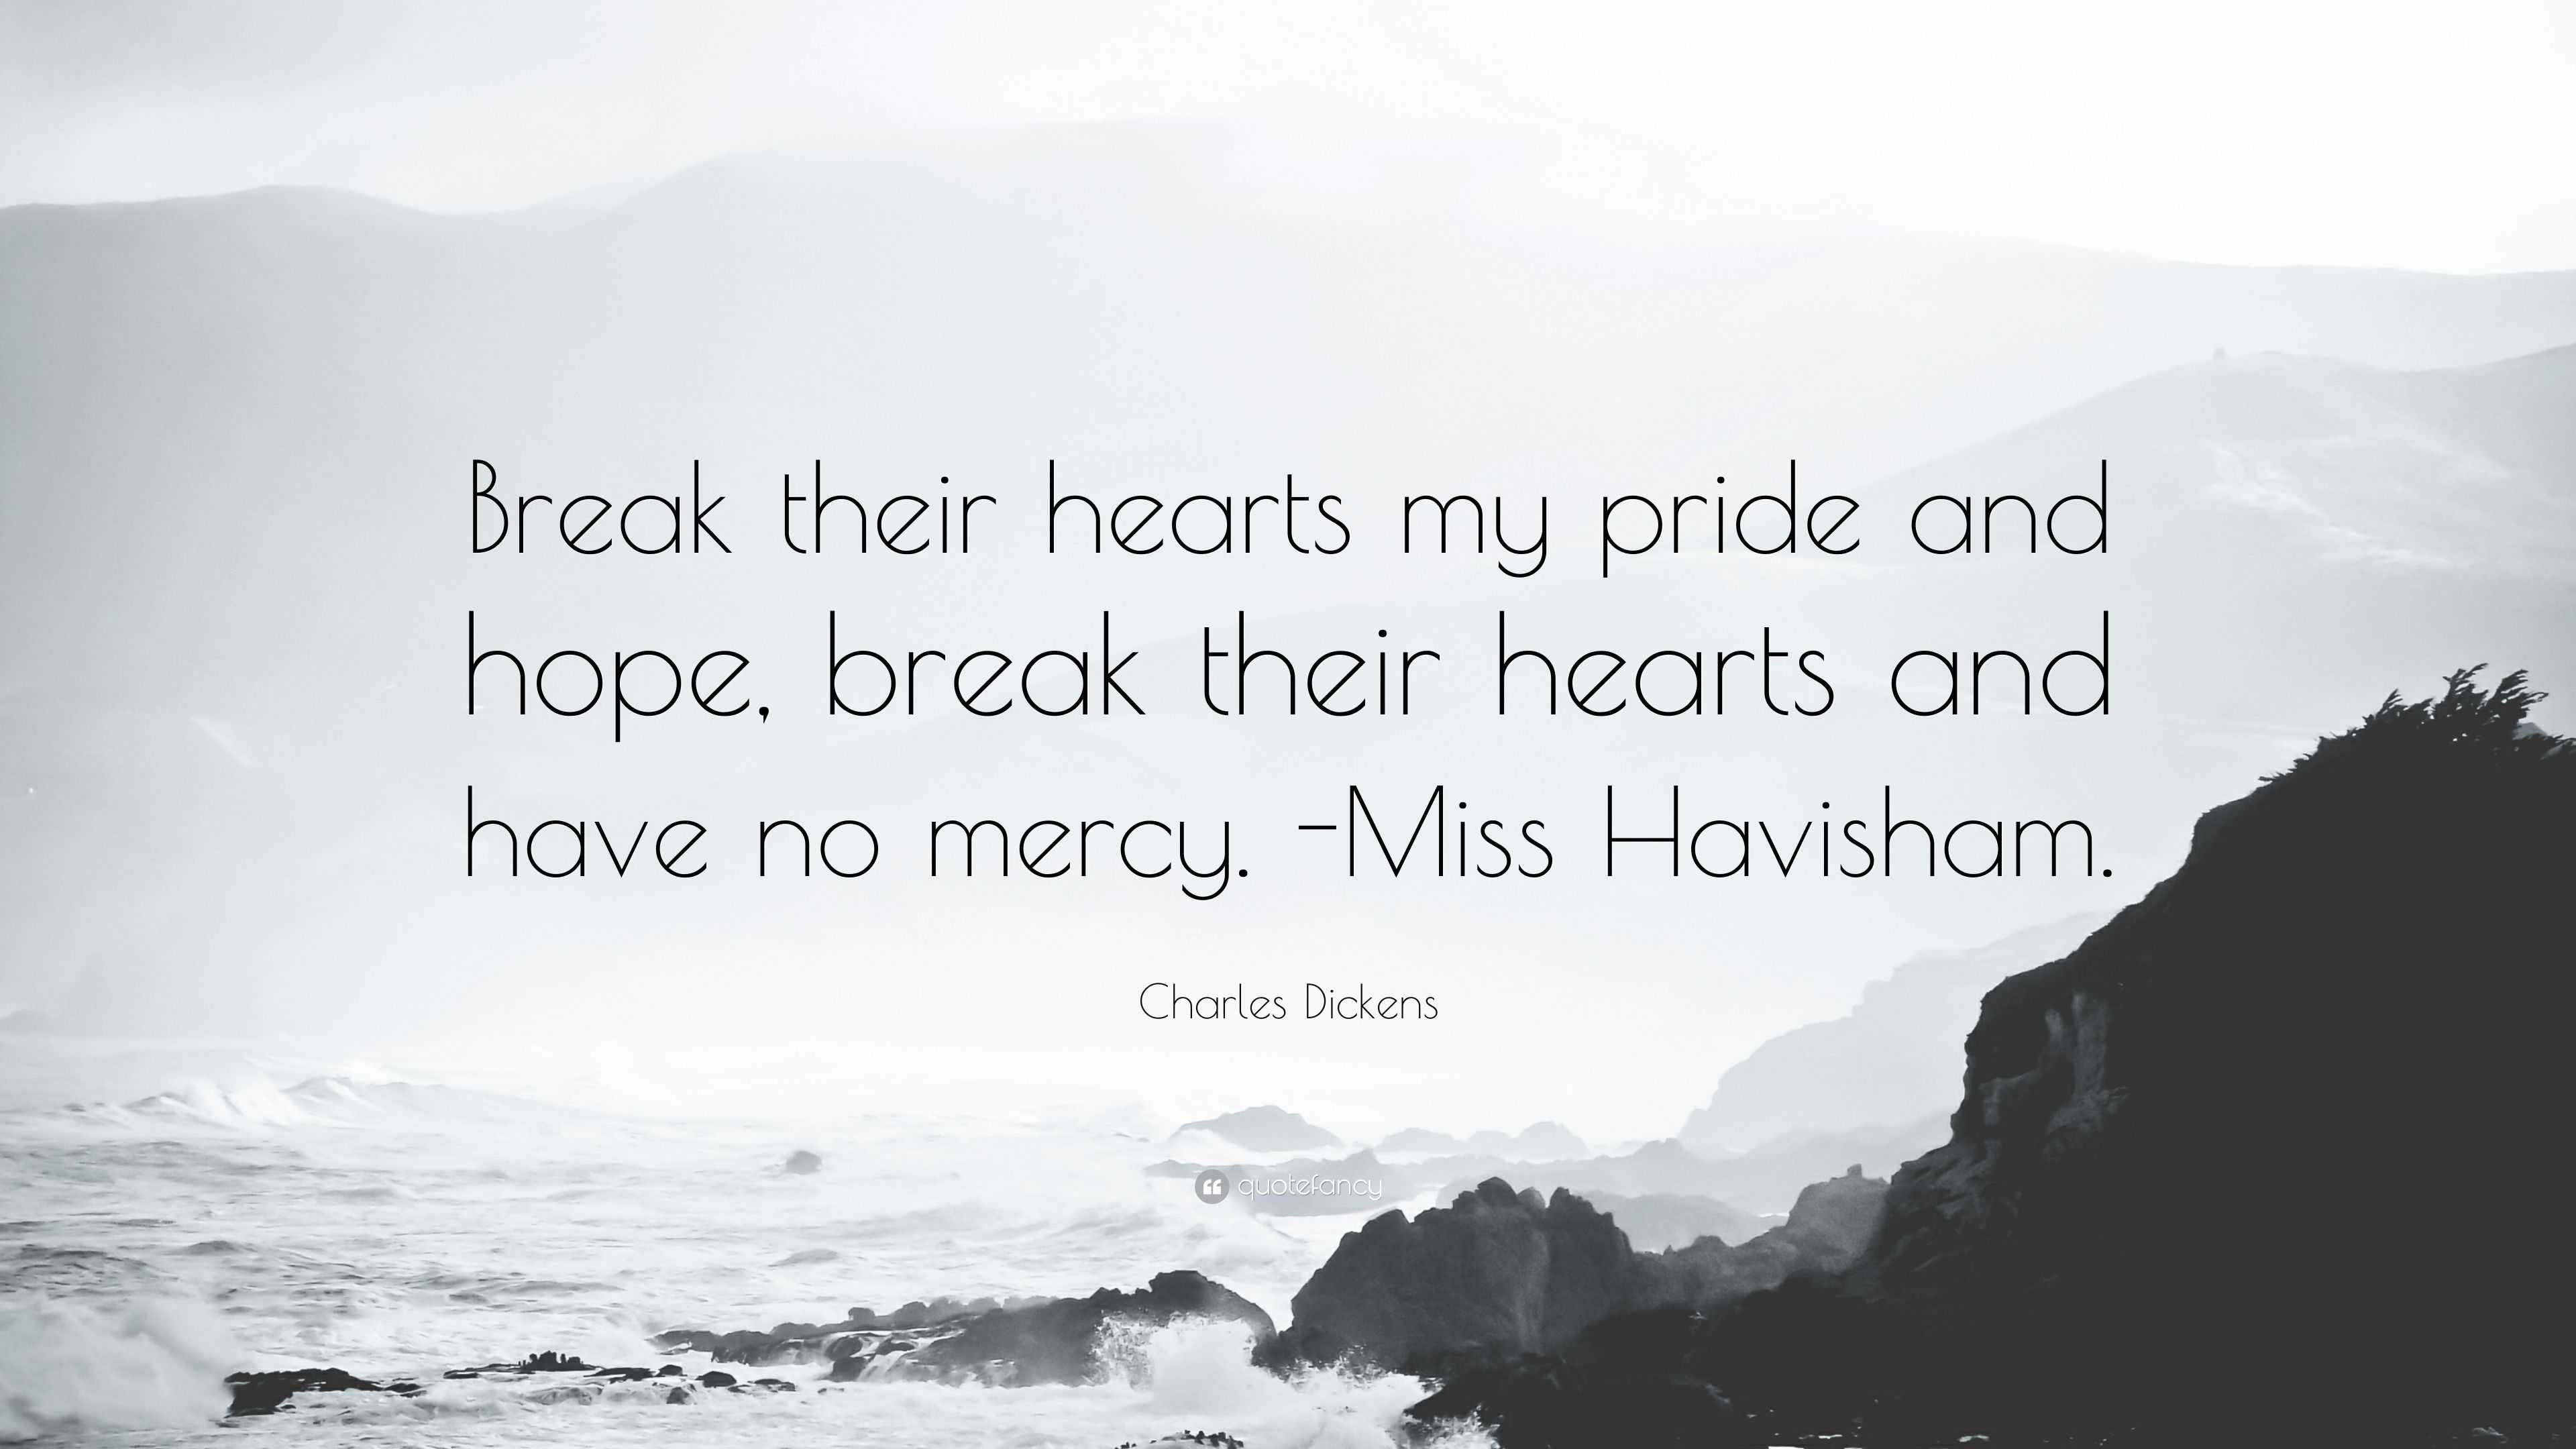 Charles Dickens Quote “Break their hearts my pride and hope break their hearts